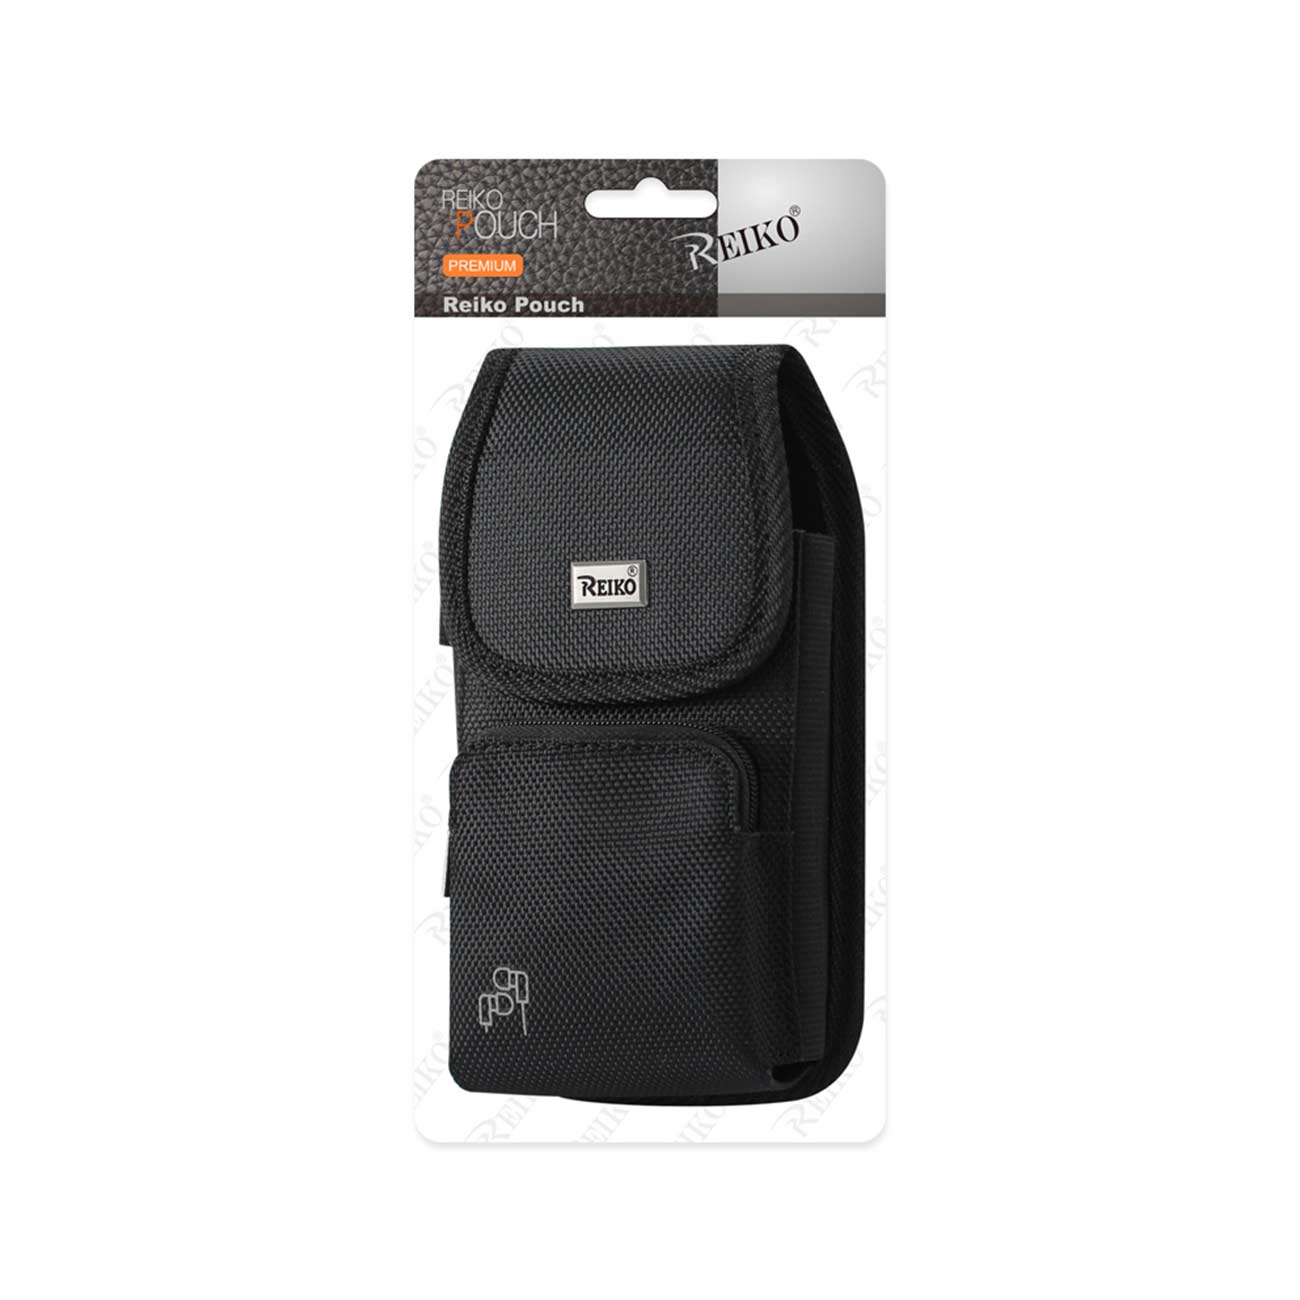 Vertical Rugged Pouch/Phone Holster With Zipper Pocket Black In Cardboard Packaging